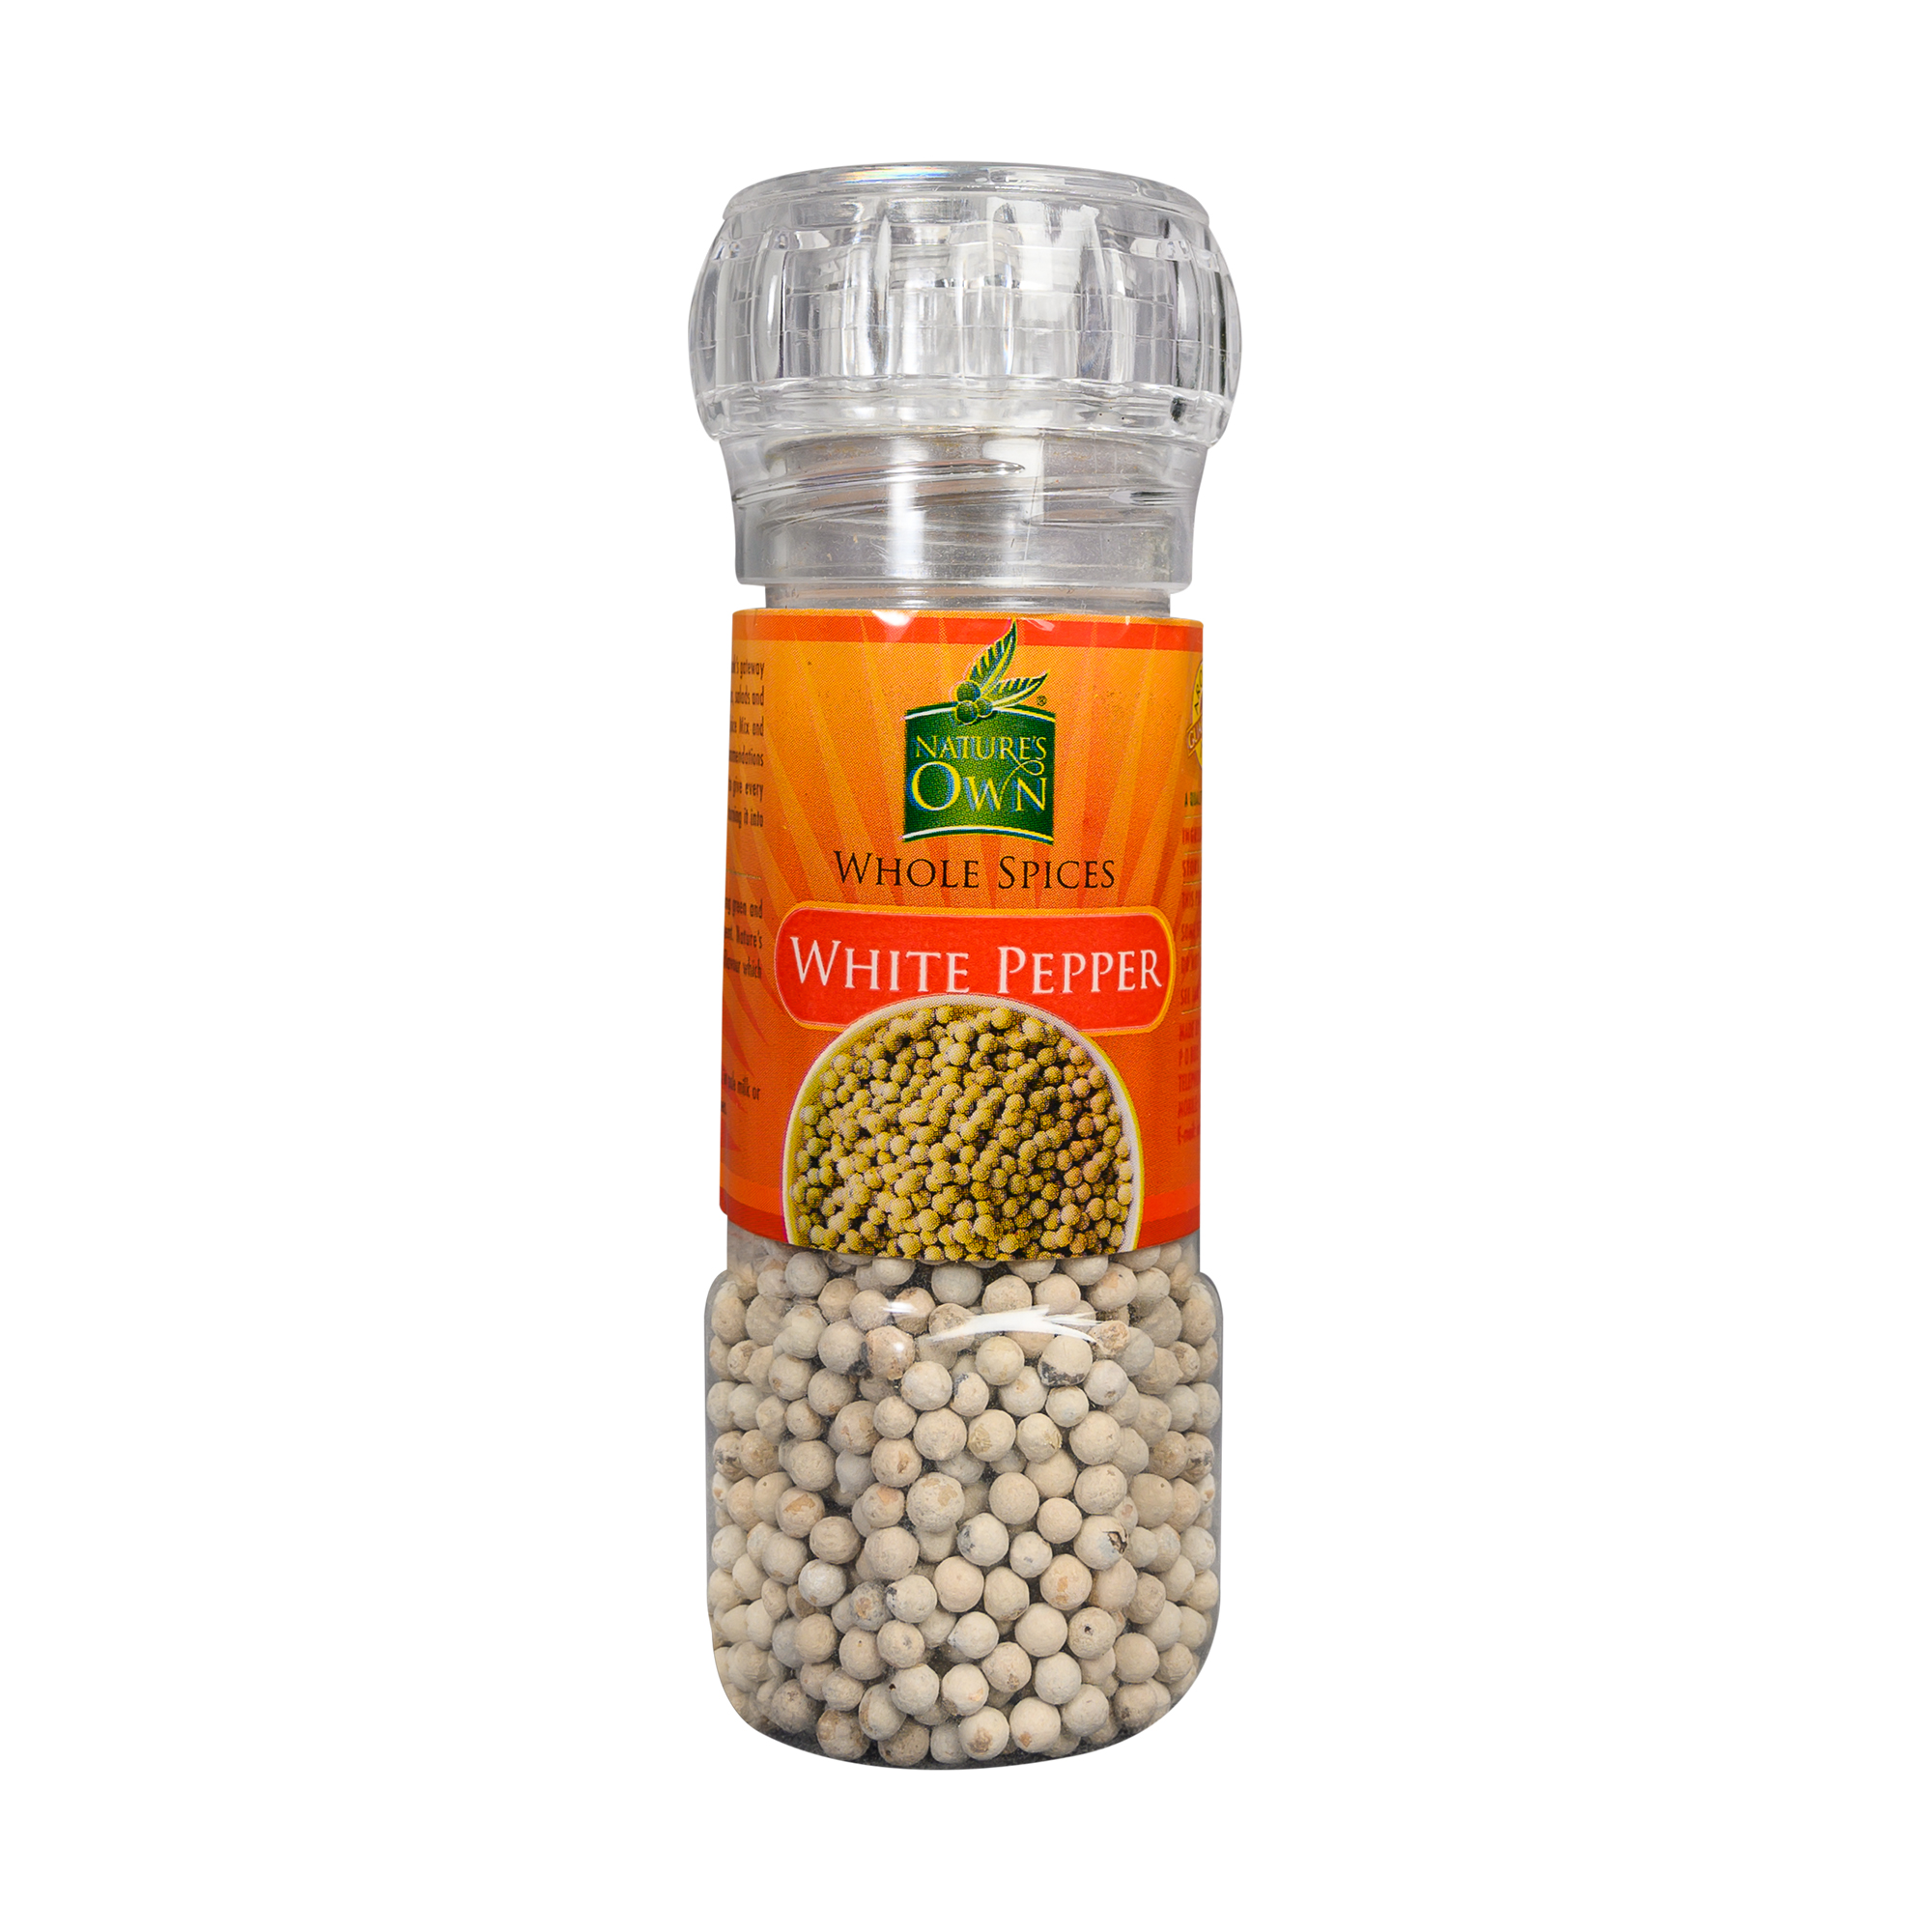 Natures Own Whole Spices White Pepper 40g